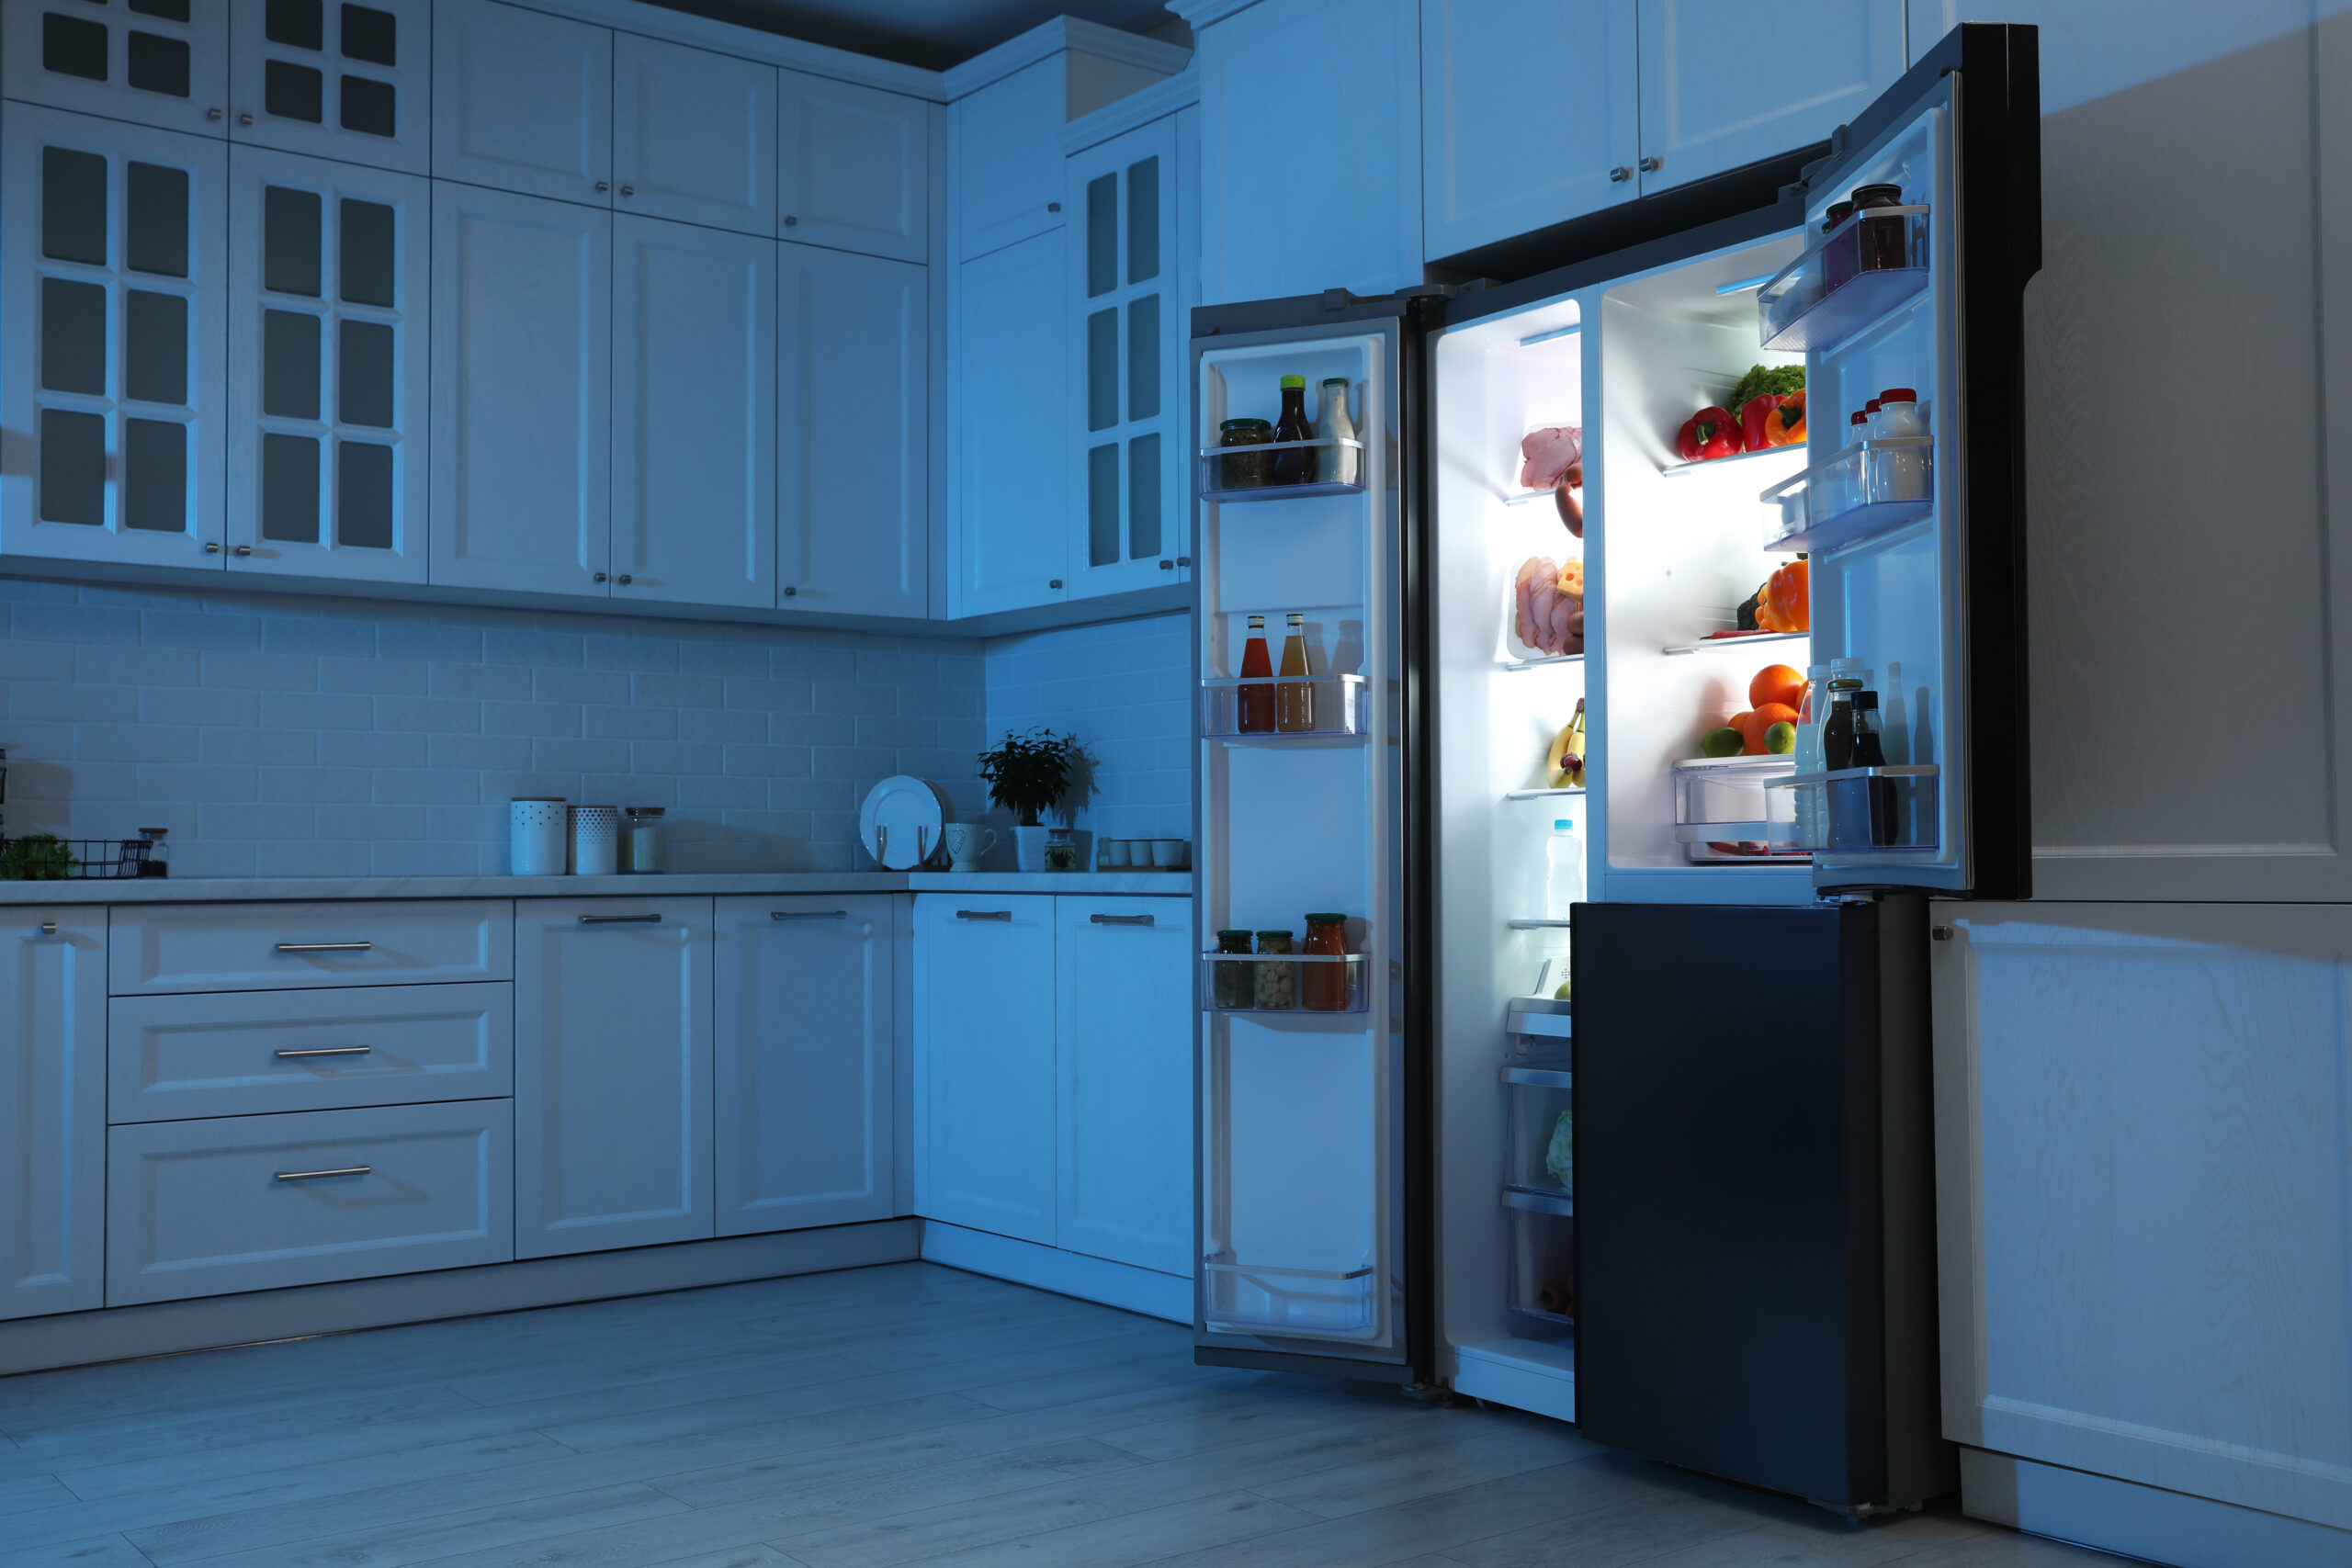 kitchen cabinets with an open refrigerator at night